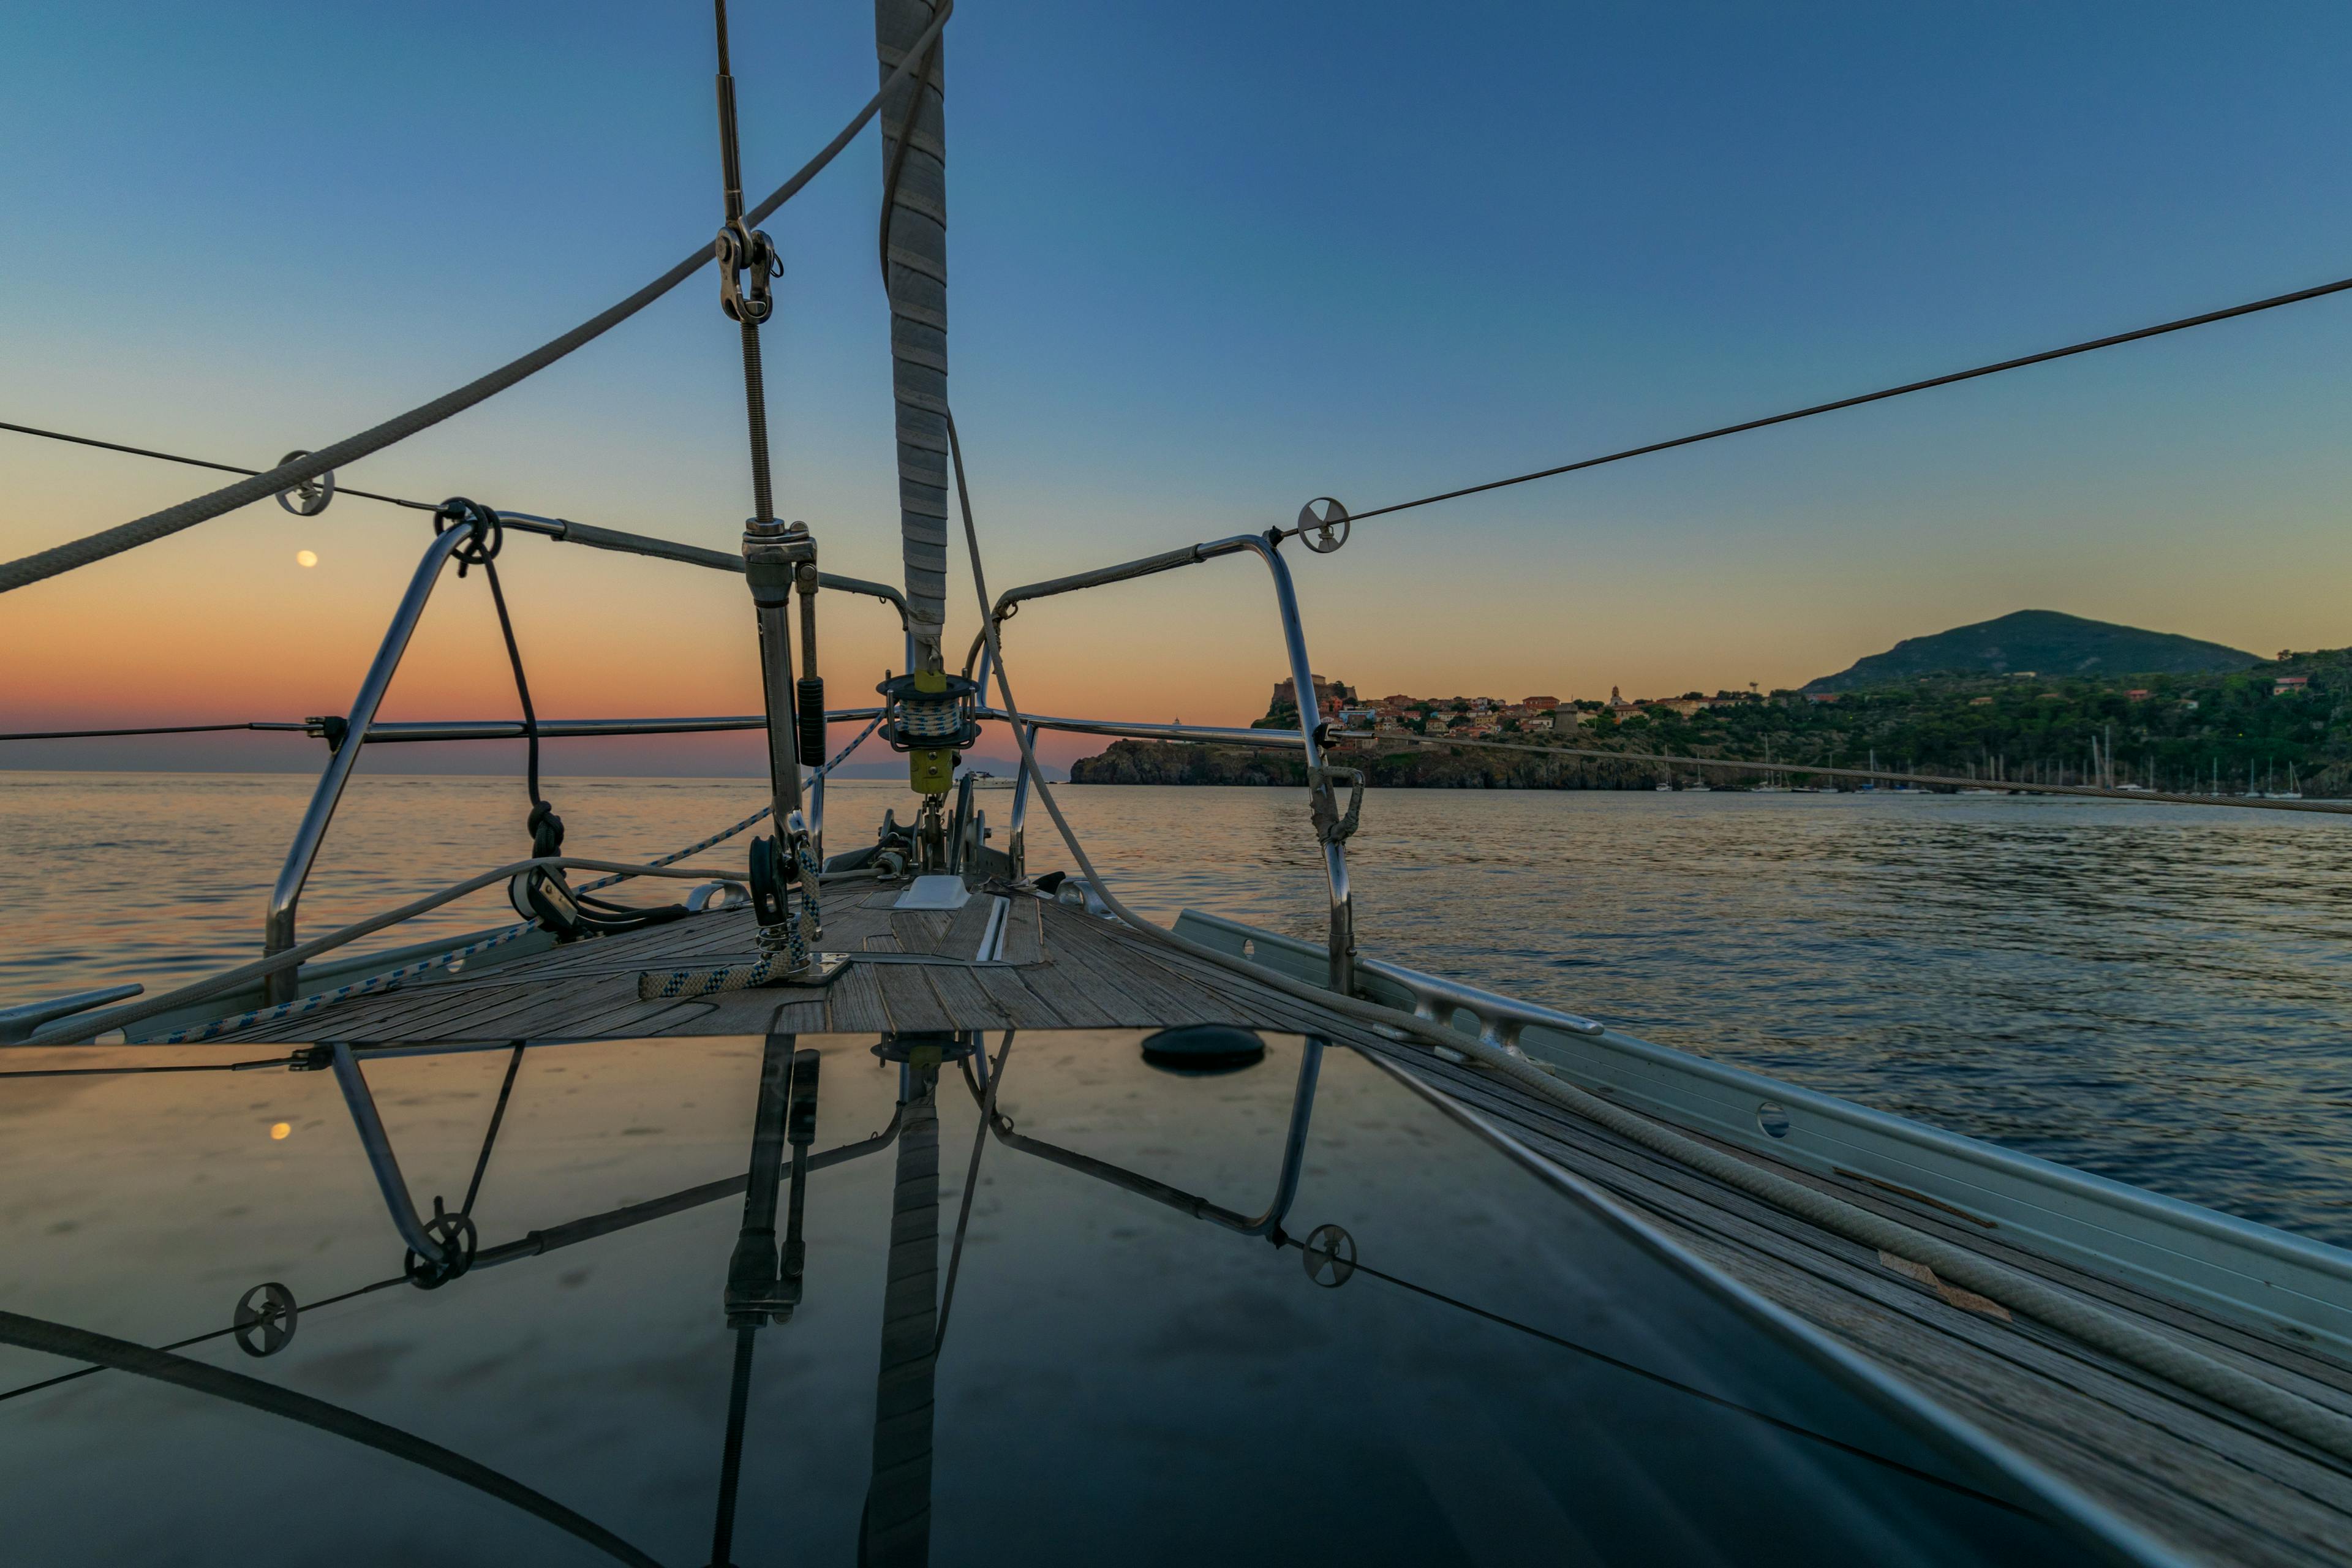 Falling in love with sailing in Tuscany